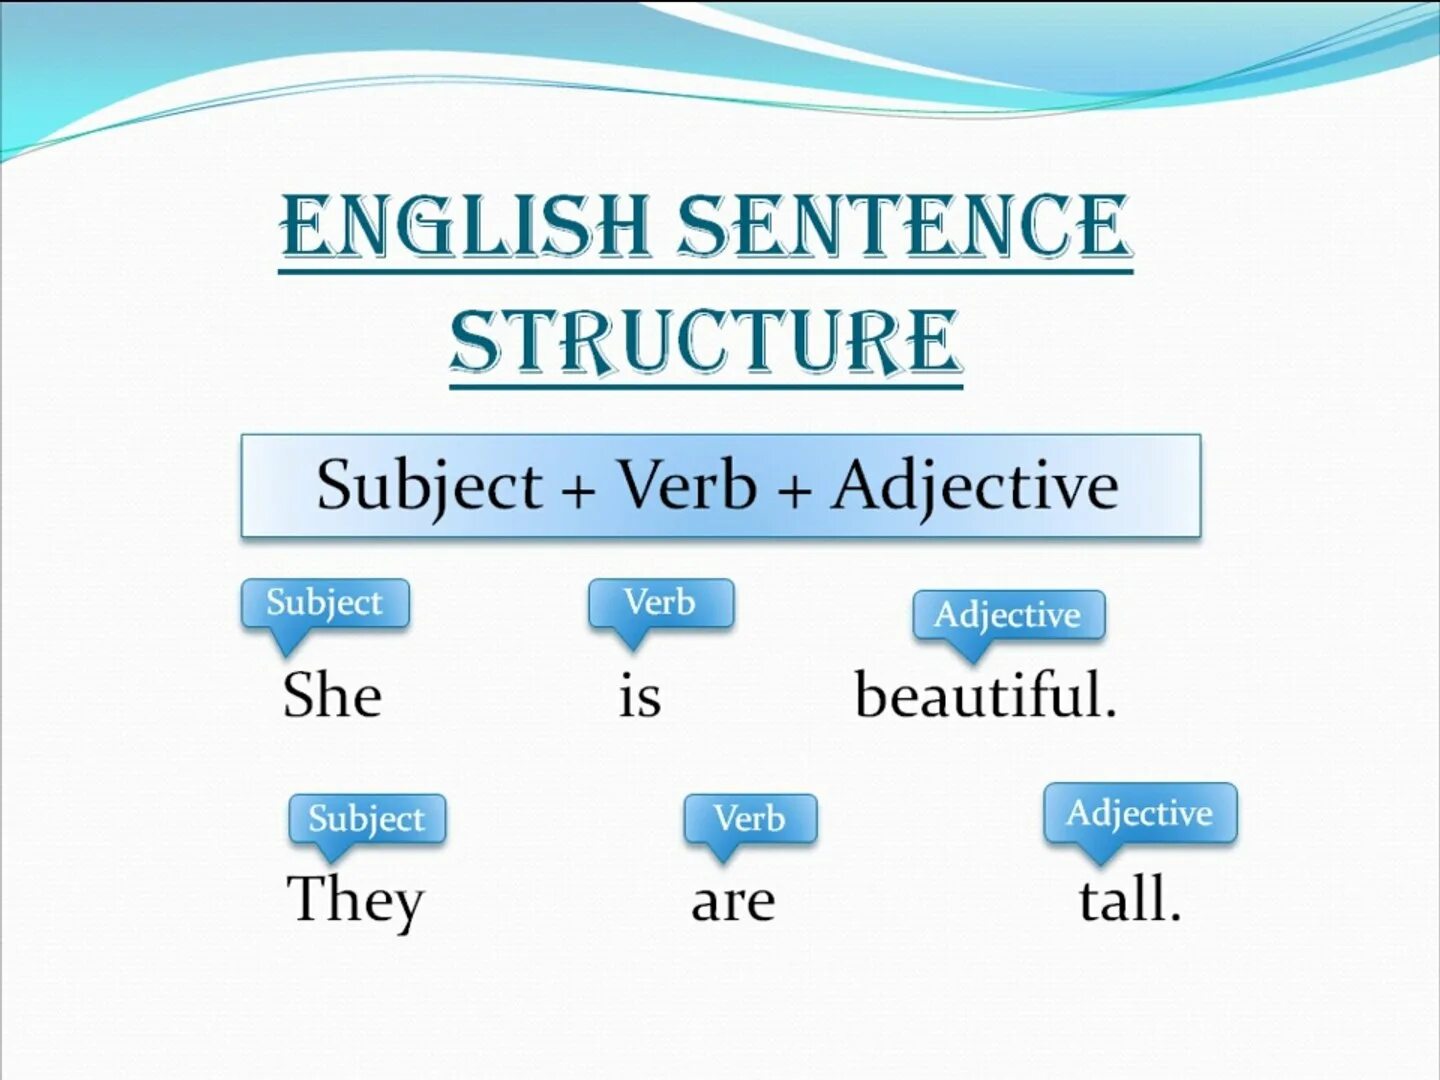 Sentence elements. Sentence structure in English. Grammar sentence structure. Basic sentence structure in English. English sentences в английском.